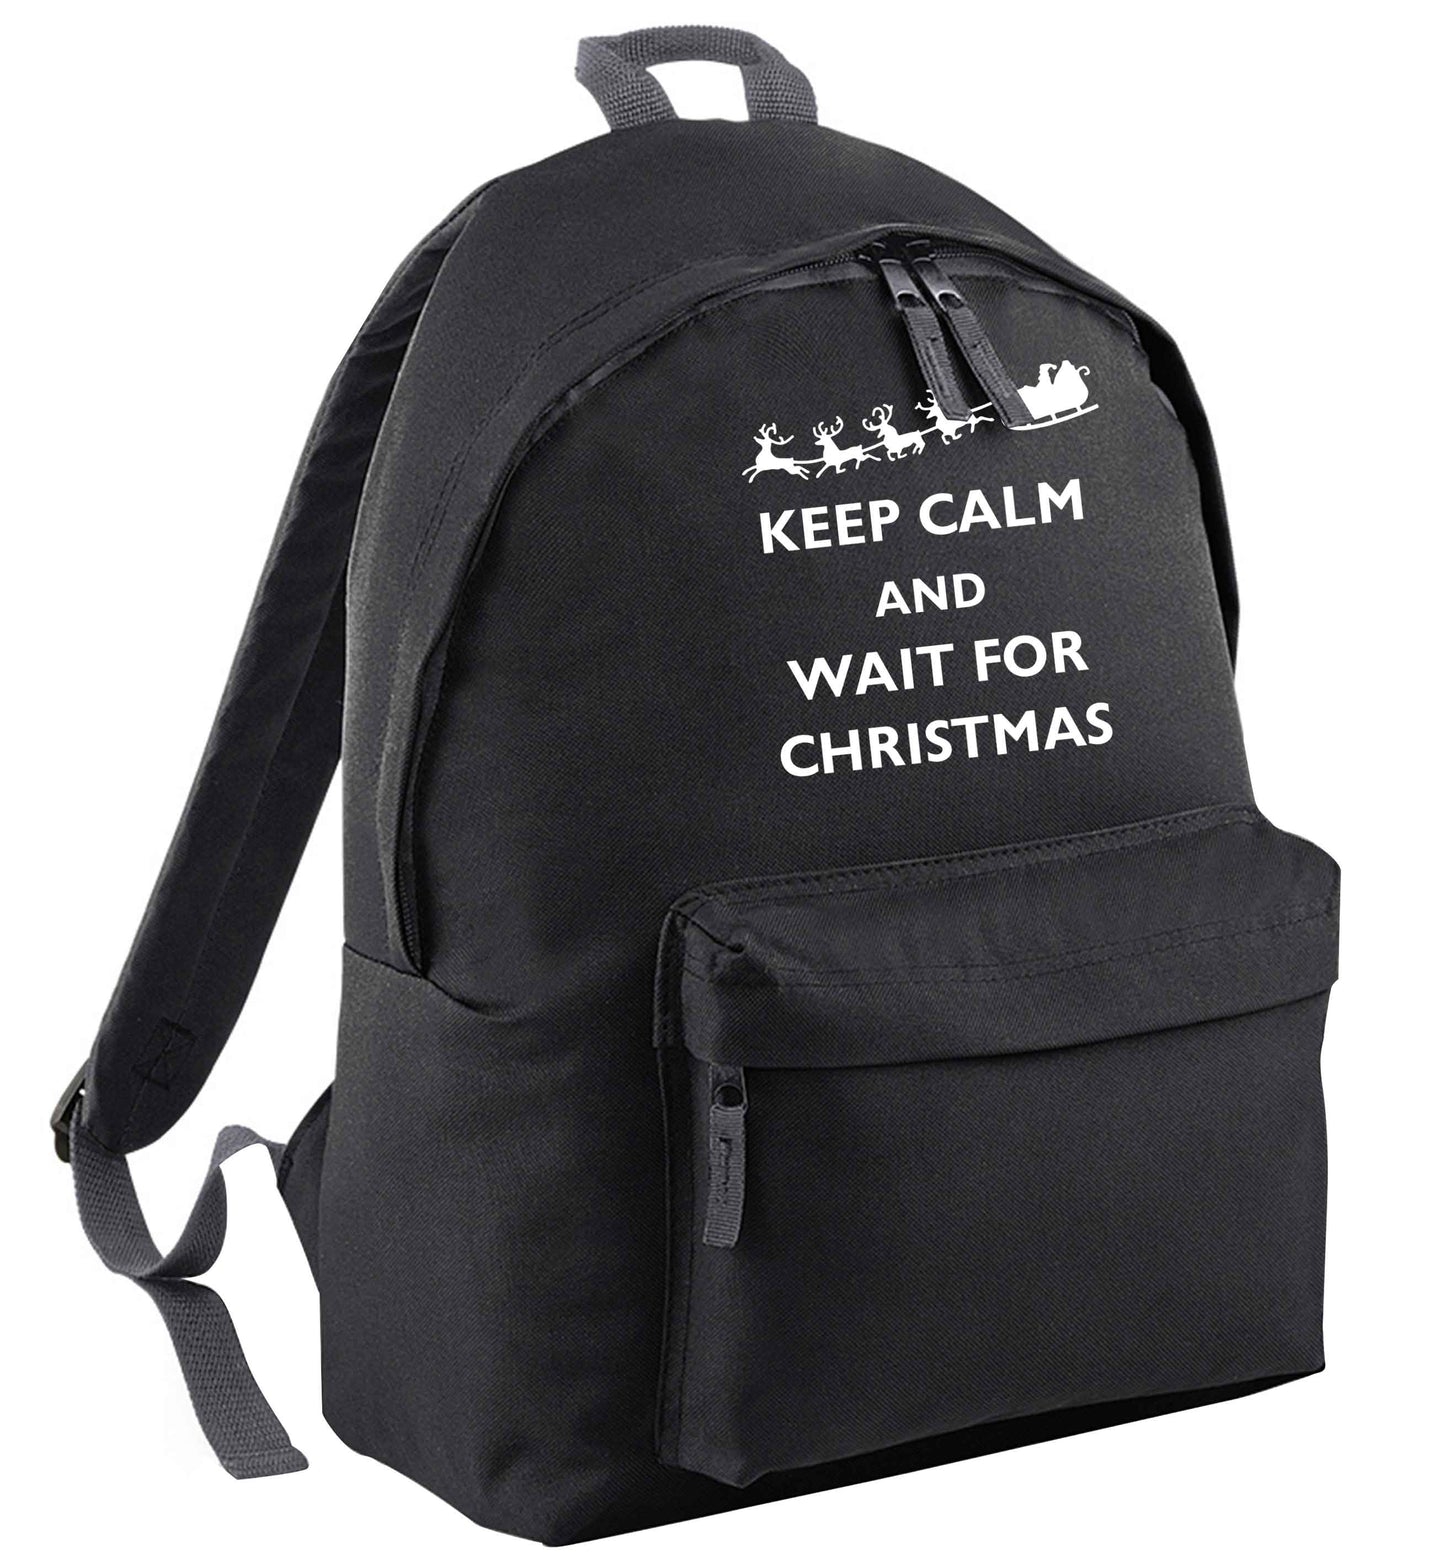 Keep calm and wait for Christmas | Children's backpack